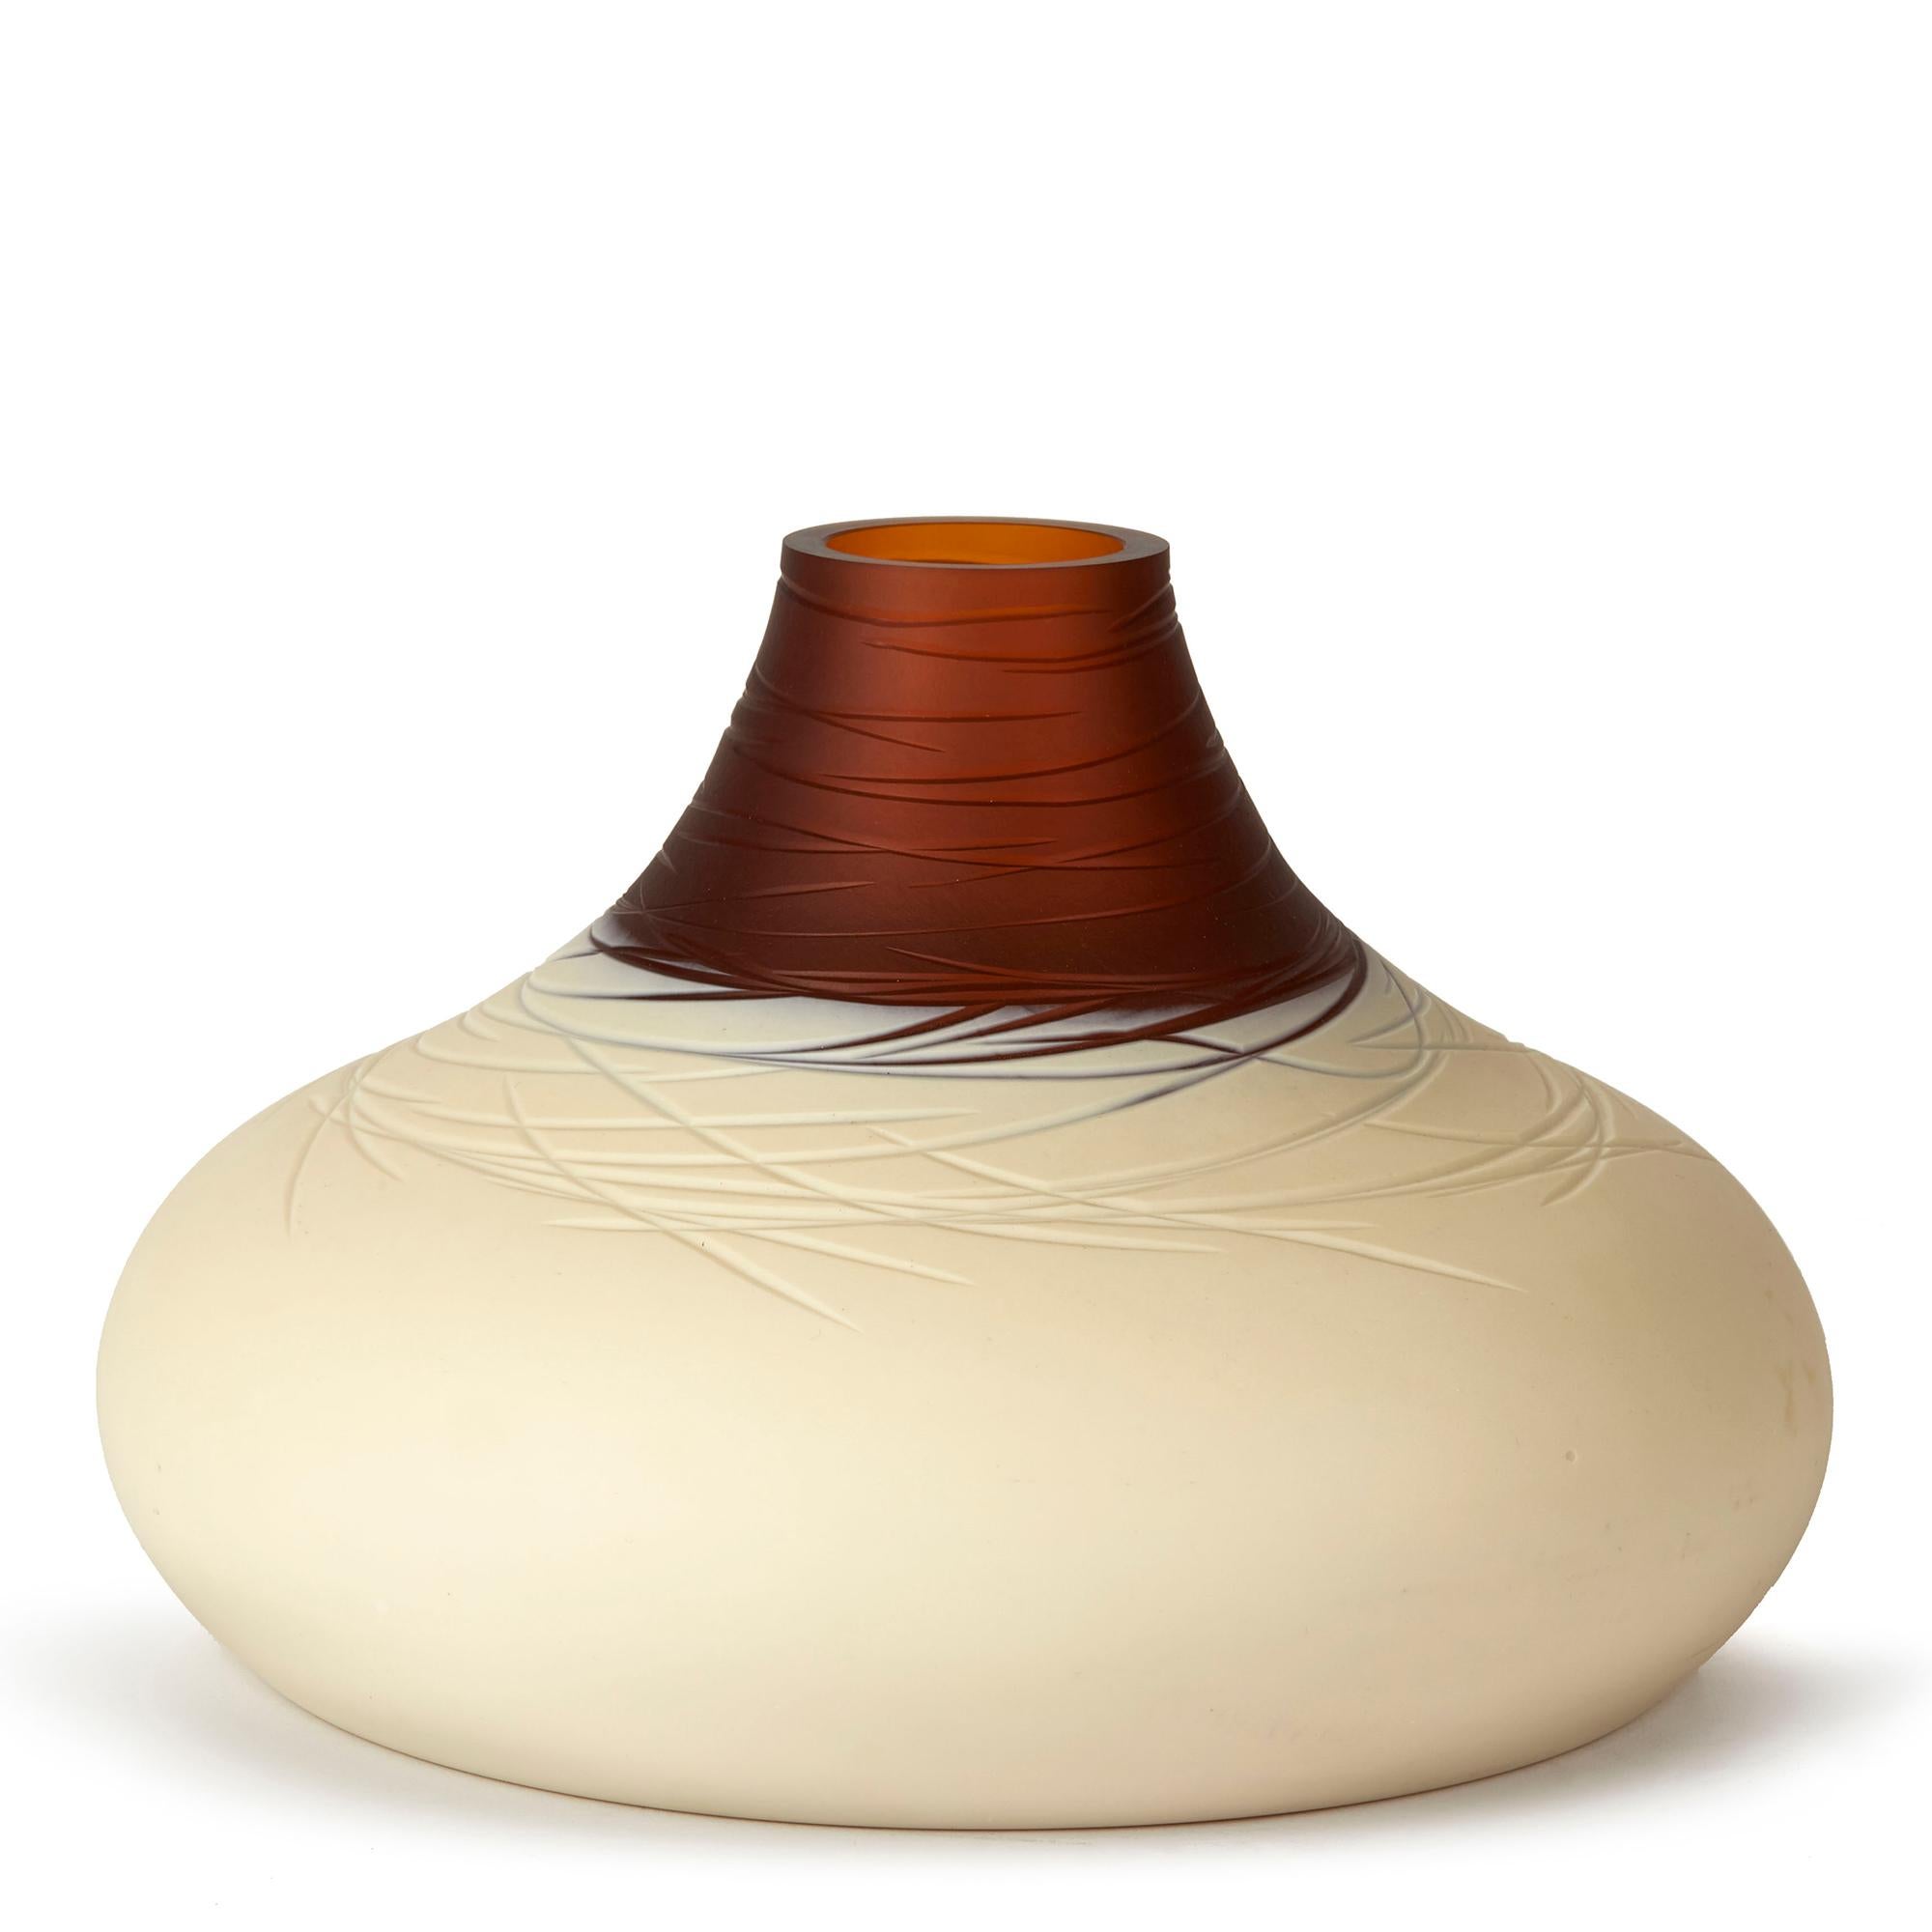 A stunning Italian Caramello art glass vase designed by Luca Nichetto for Salviati glass, Murano. The vase is heavily made and of wide squat rounded shape with incised trailed patterning to the upper body and neck. The vase has a short funnel shaped